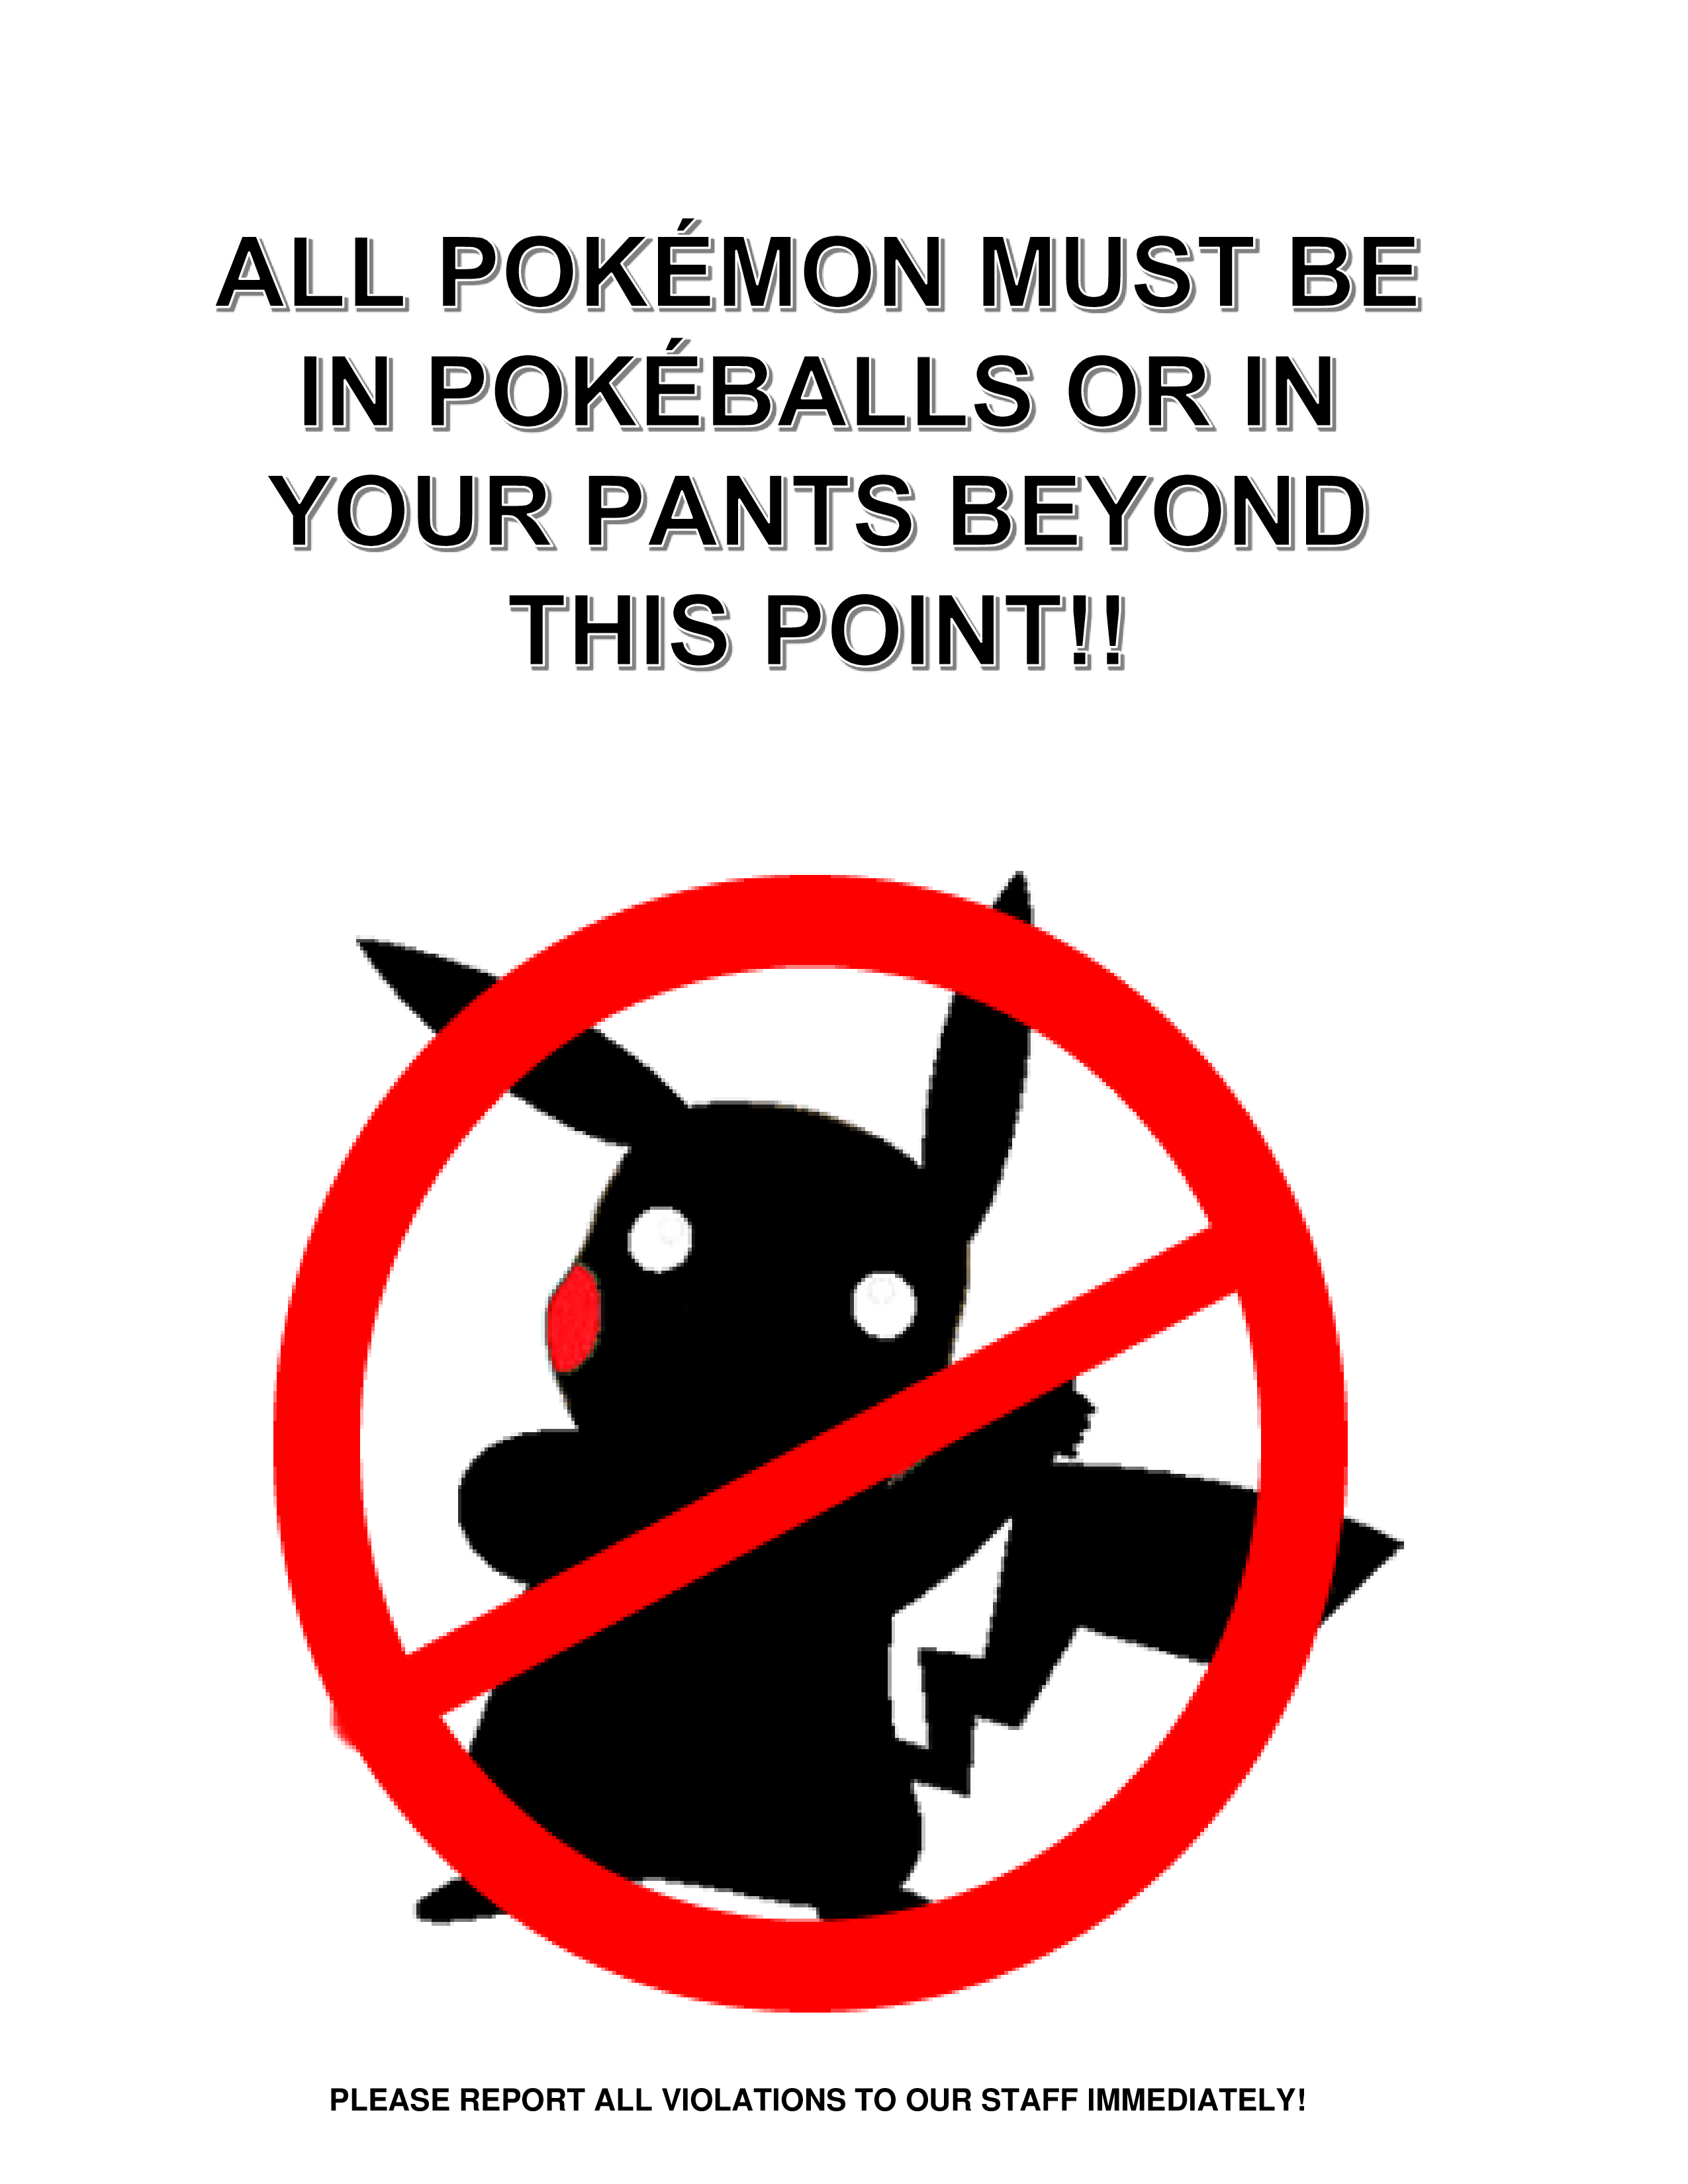 Pokemon Not Allowed Poster Template main image